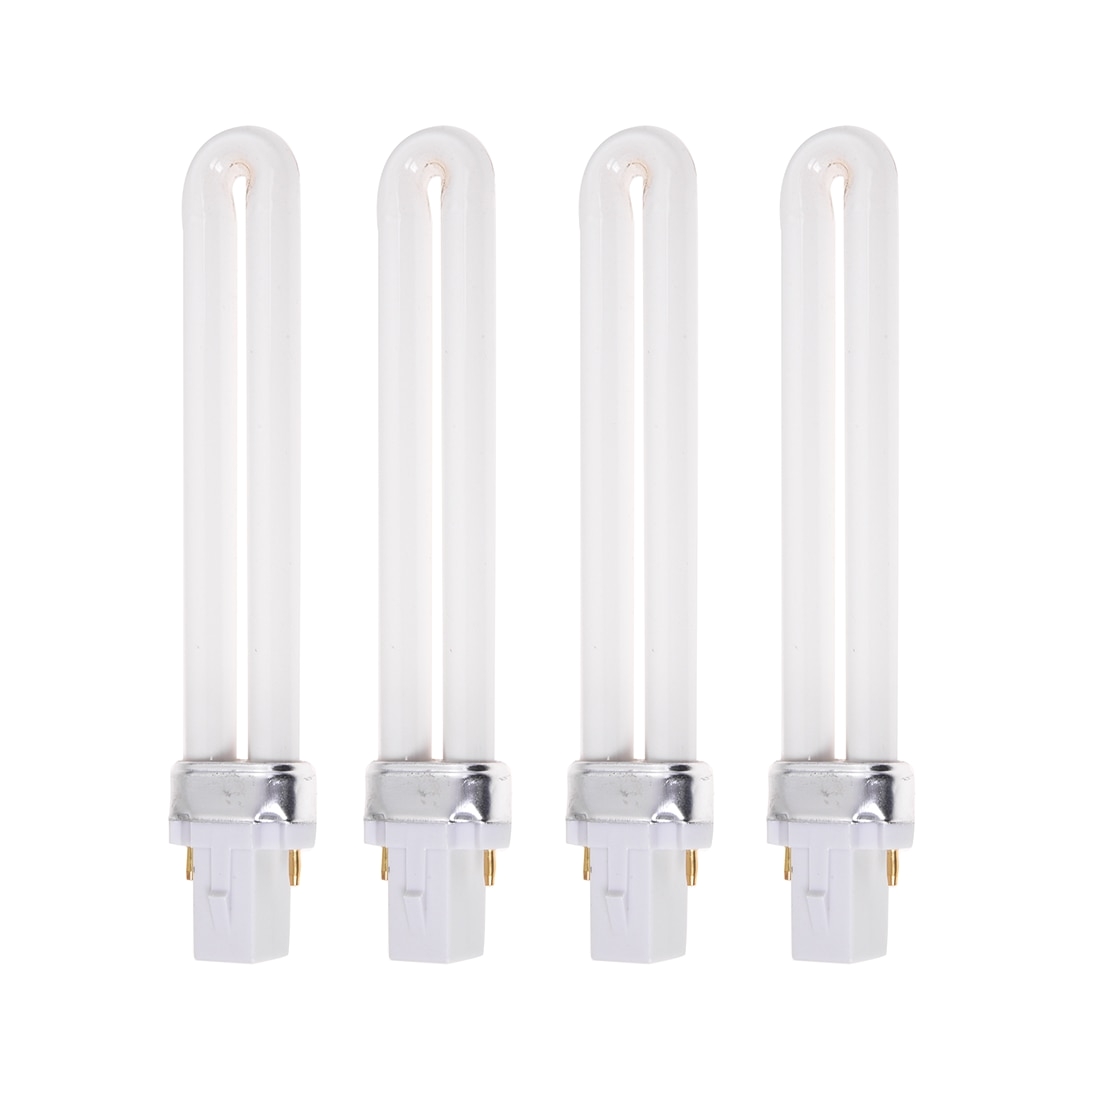 4 x 9w nail uv light bulb tube replacement for 36w uv curing lamp dryer